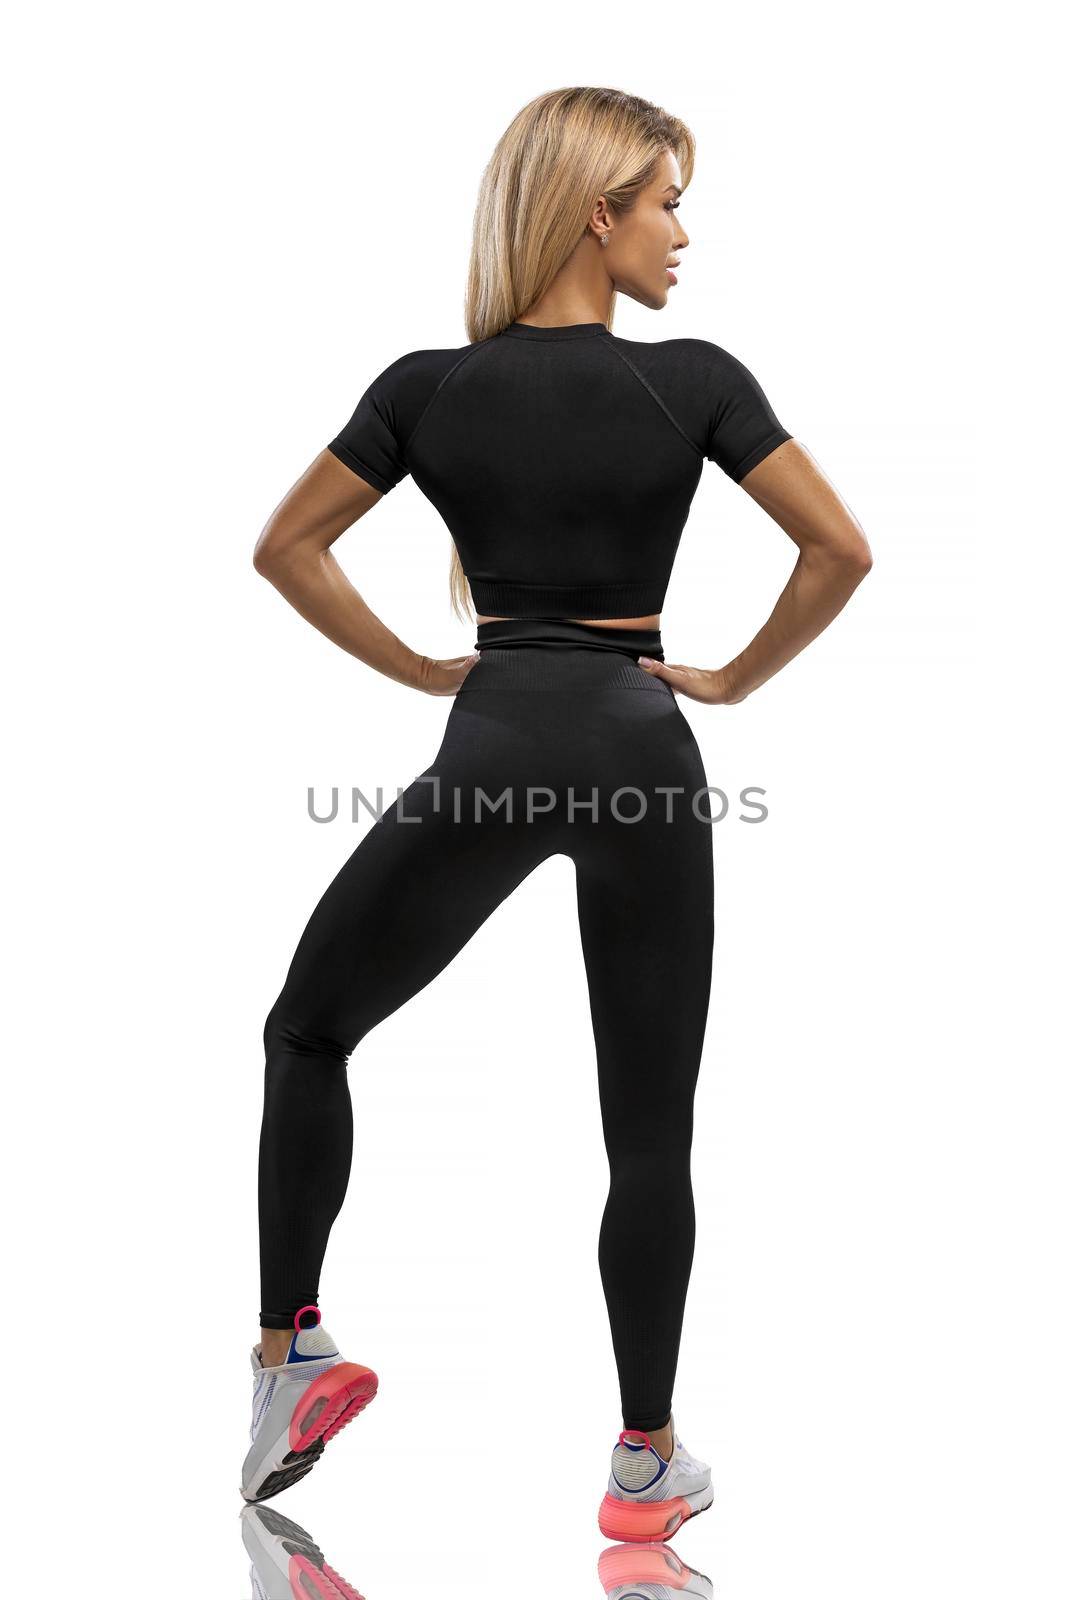 Blonde fit girl in black leggings and top on a white background in the studio by but_photo